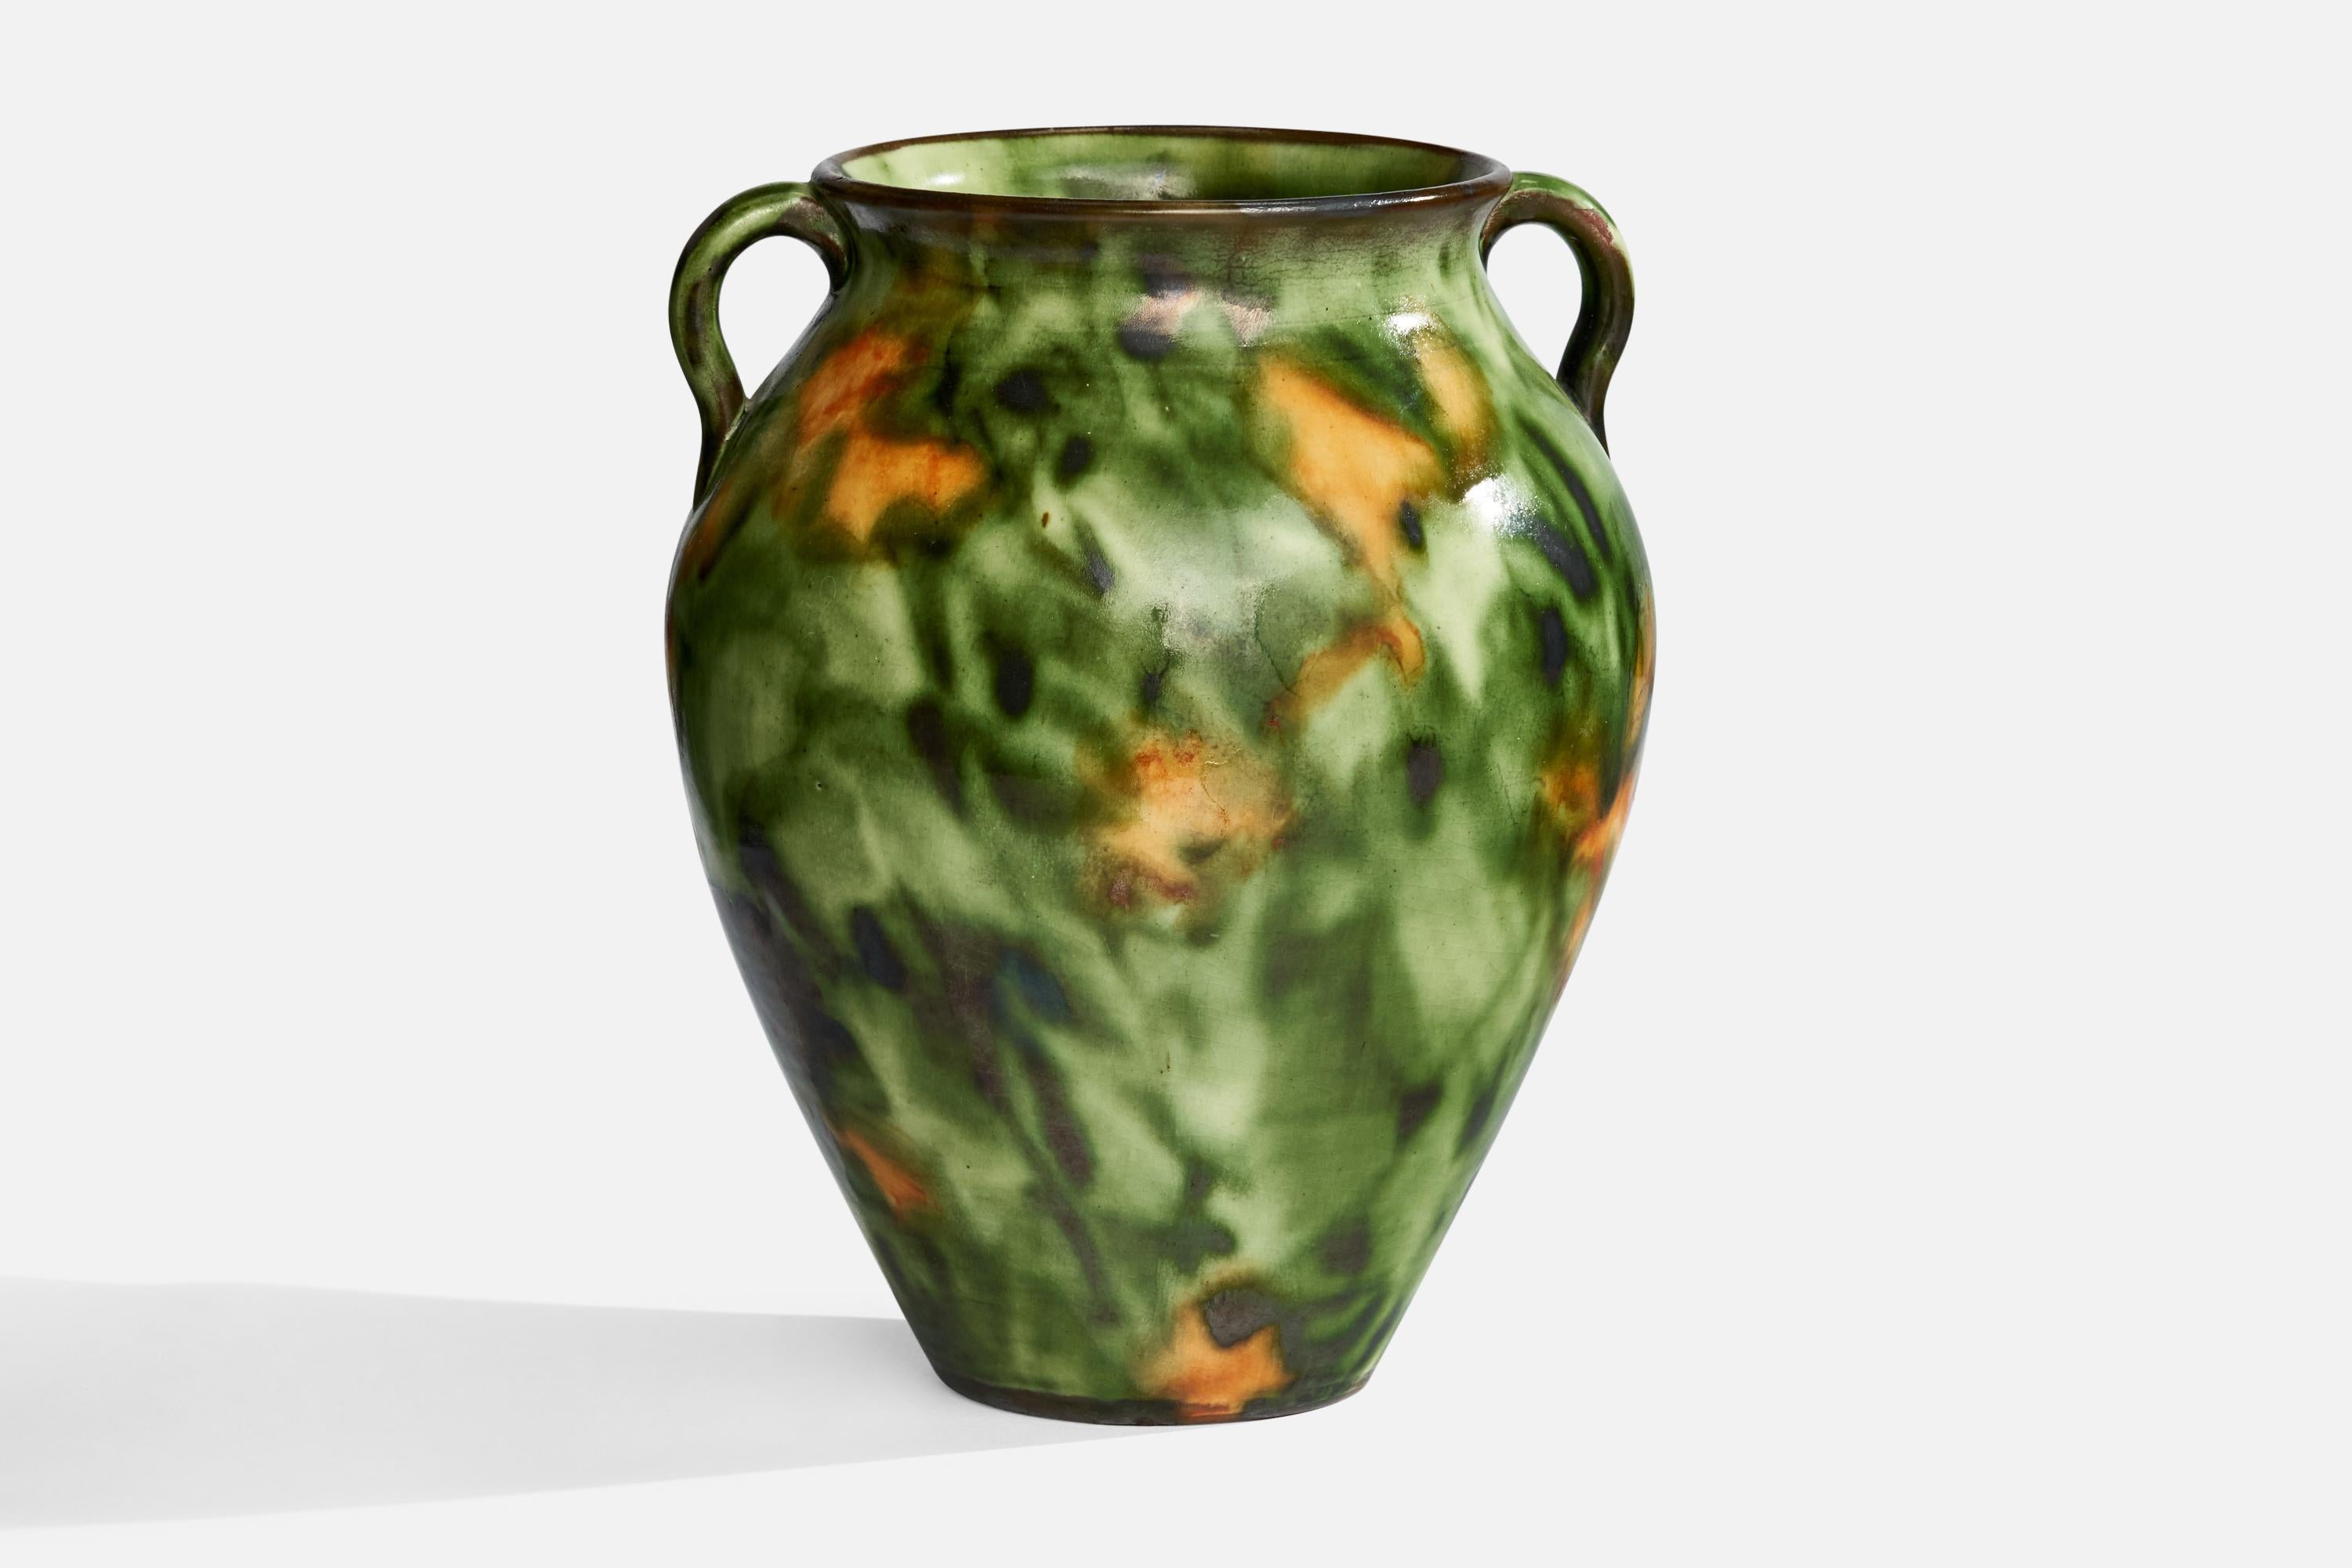 A green and yellow-glazed earthenware vase designed by Erik Mornils and produced by Nittsjö, Sweden c. 1930s.